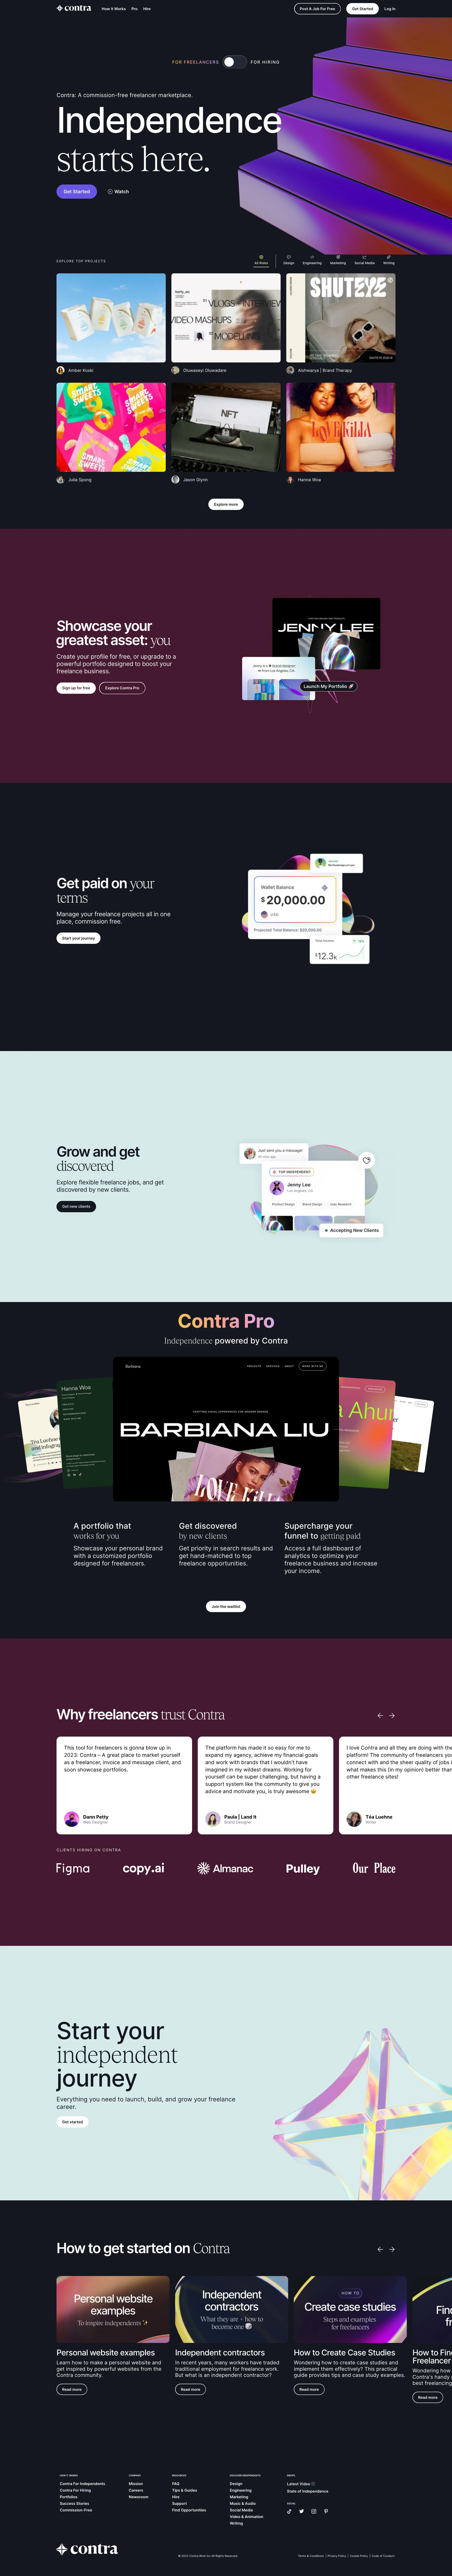 Contra Landing Page Example: Contra is the Independent-first, commission-free freelance marketplace shaping the future of work. You bring the skills, we provide the tools and opportunities.